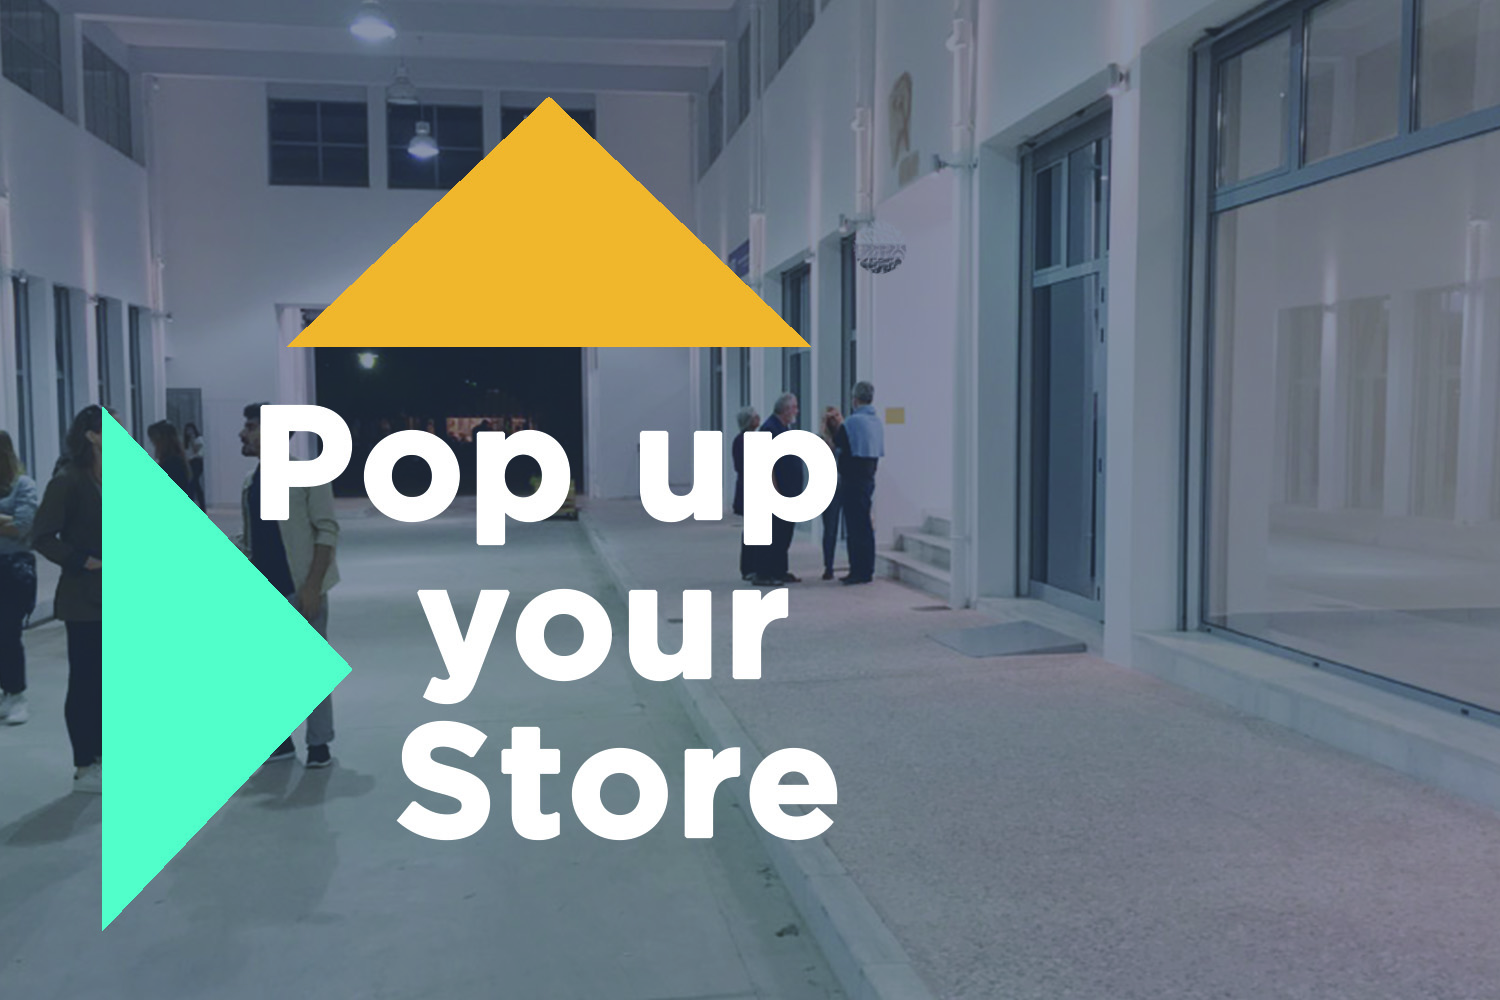 Pop up your store